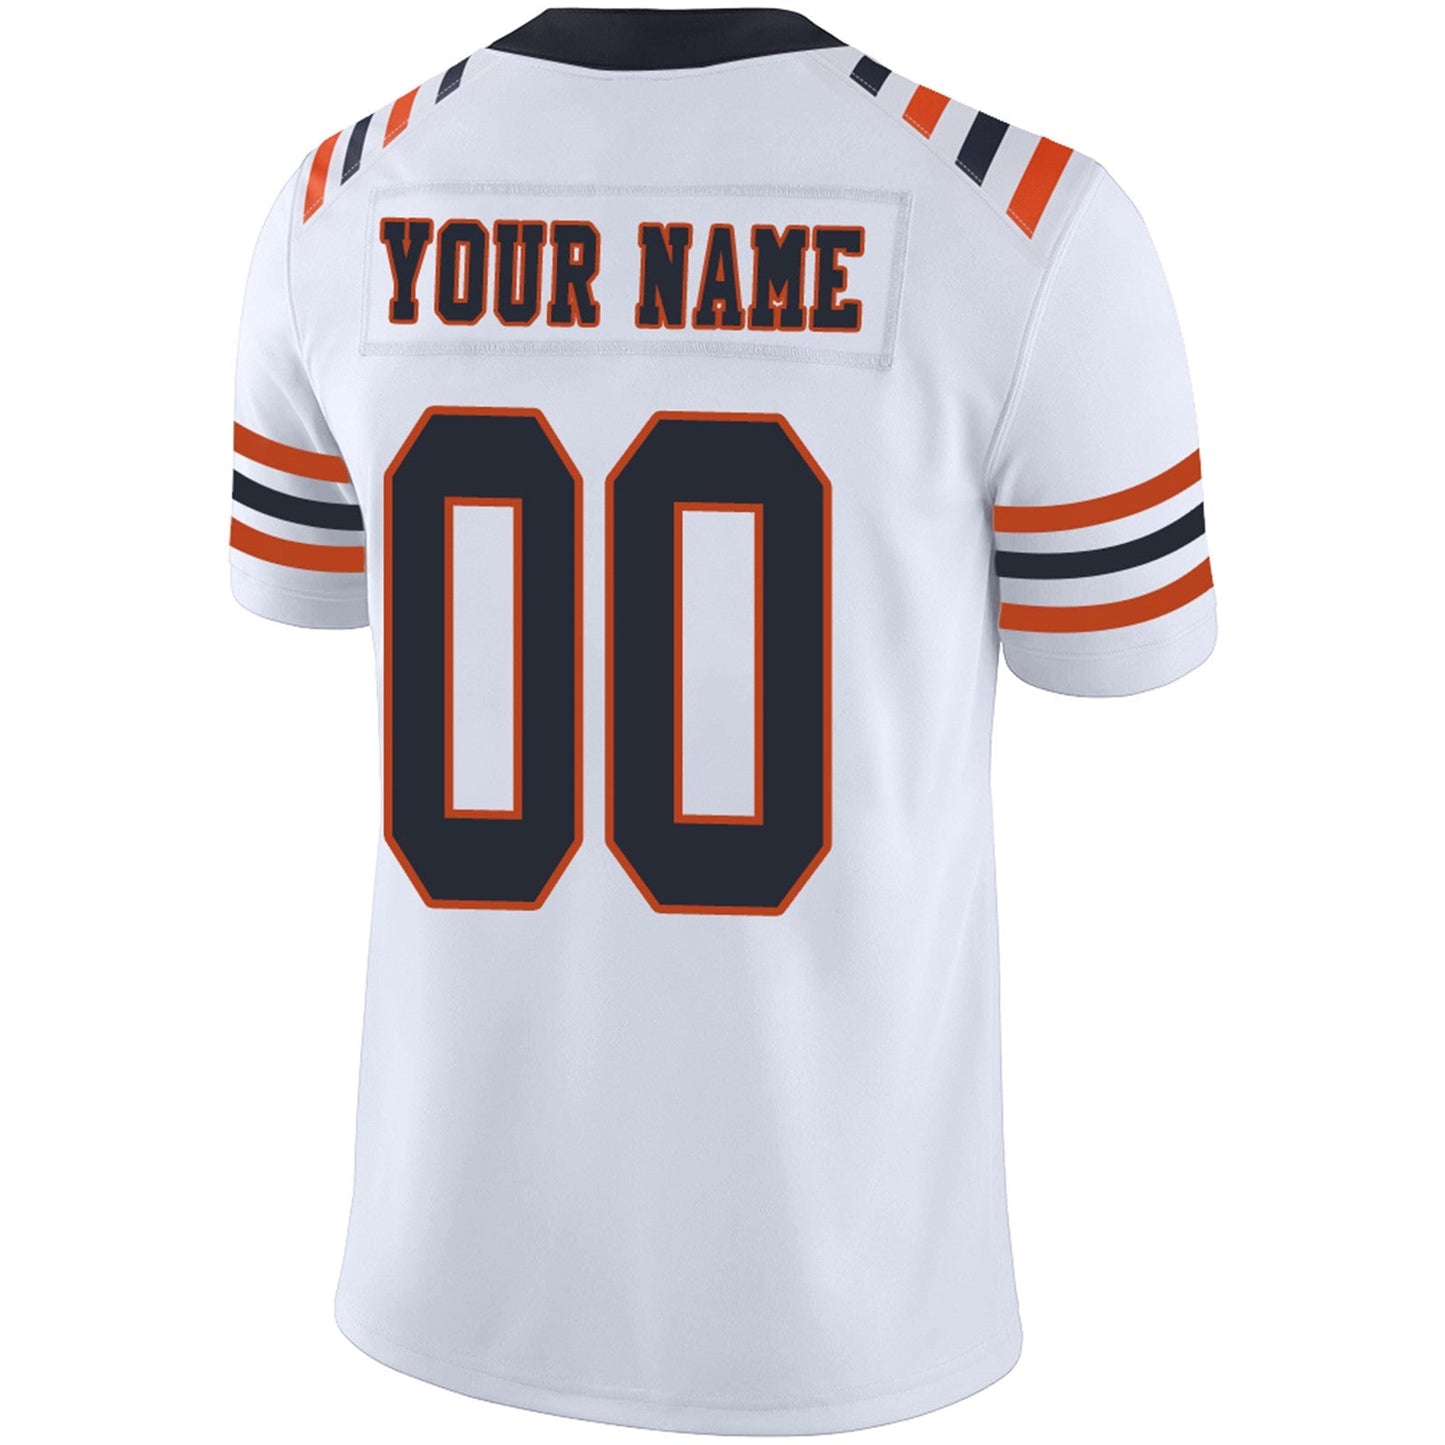 Custom C.Bears Football Jerseys Team Player or Personalized Design Your Own Name for Men's Women's Youth Jerseys Navy